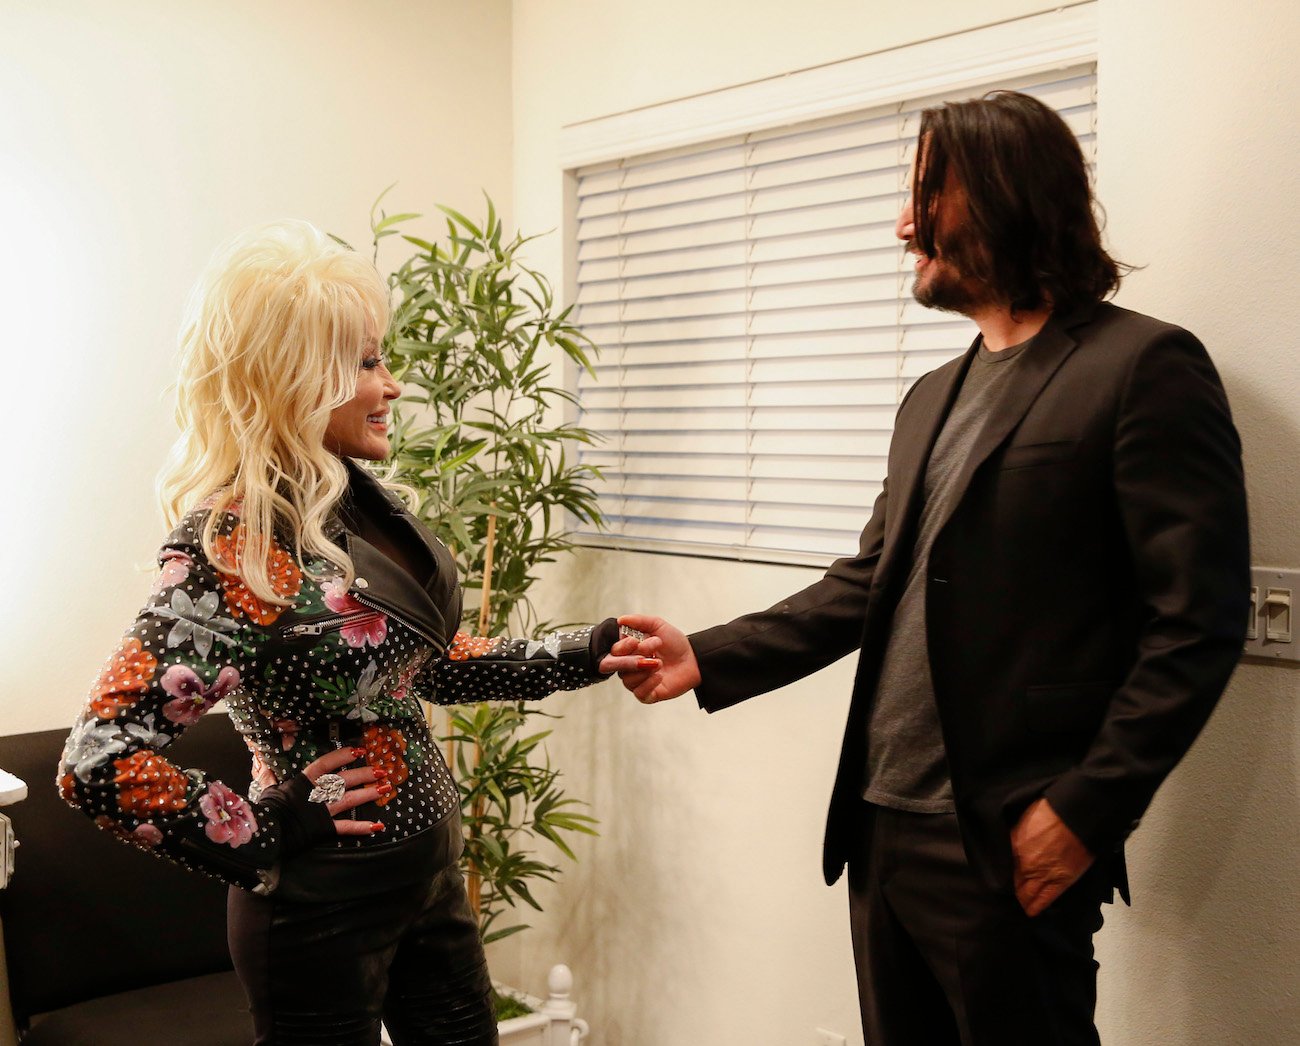 Dolly Parton wearing a multi-colored jacket while holding hands with actor Keanu Reeves on the set of 'The Talk' in 2019.